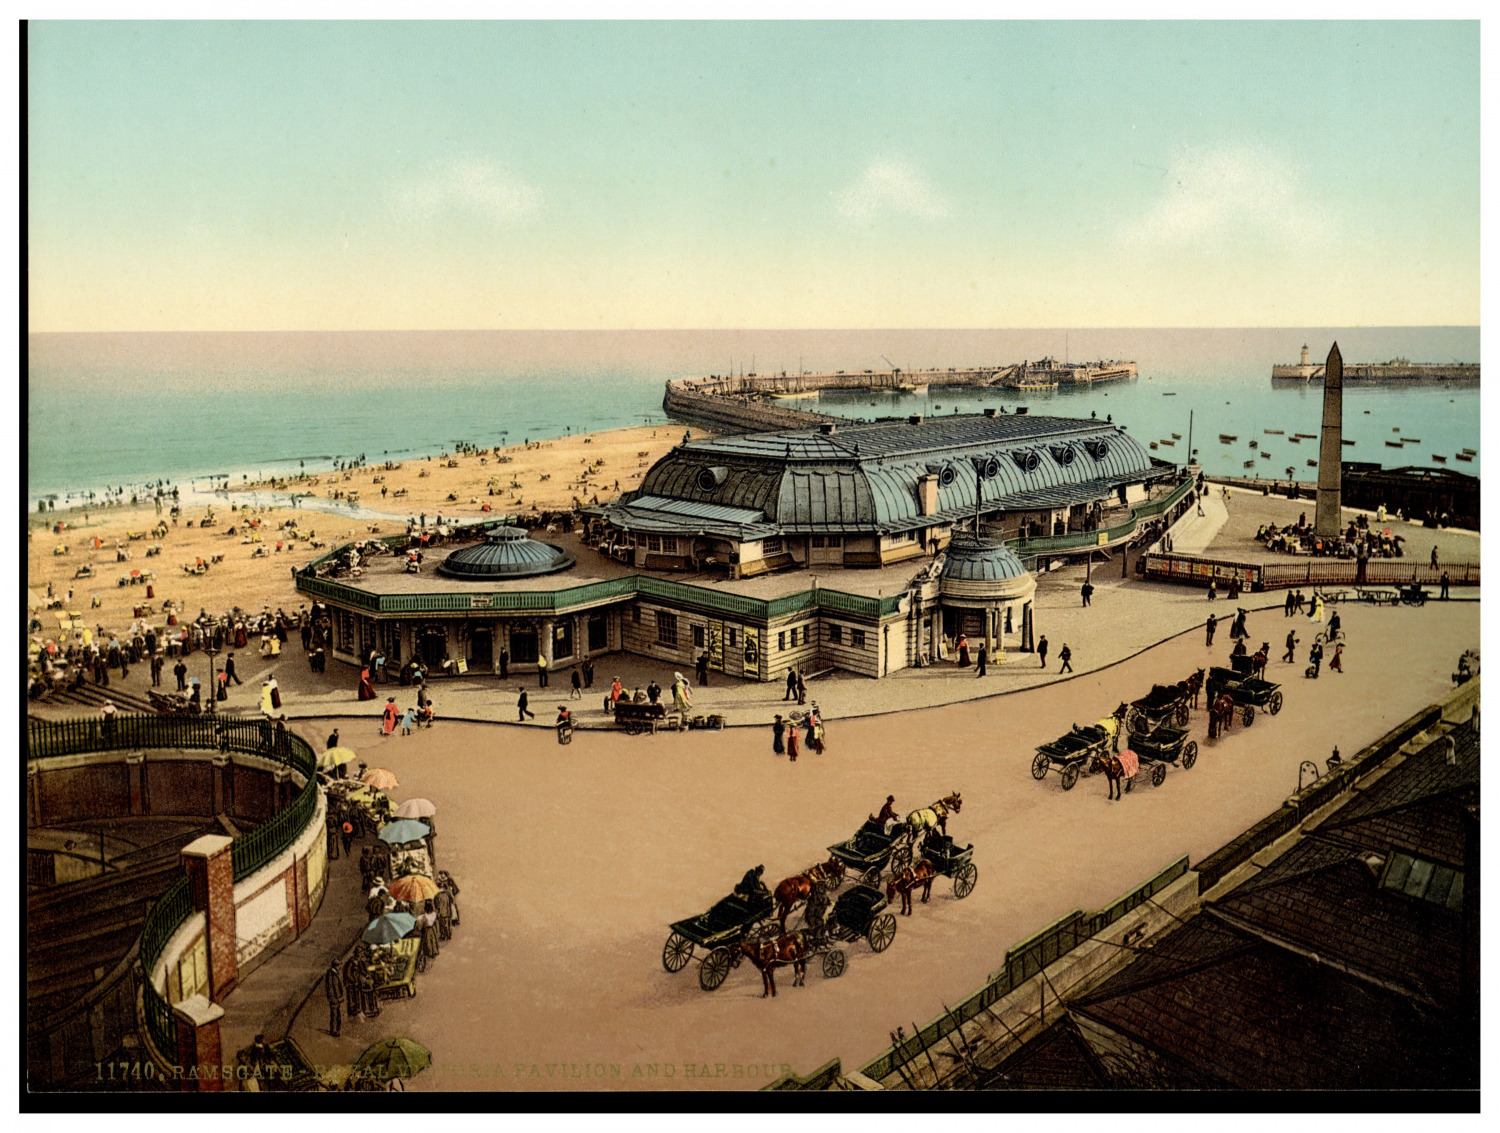 England. Ramsgate. Royal Victoria Pavilion and Harbour Vintage Photochrome by